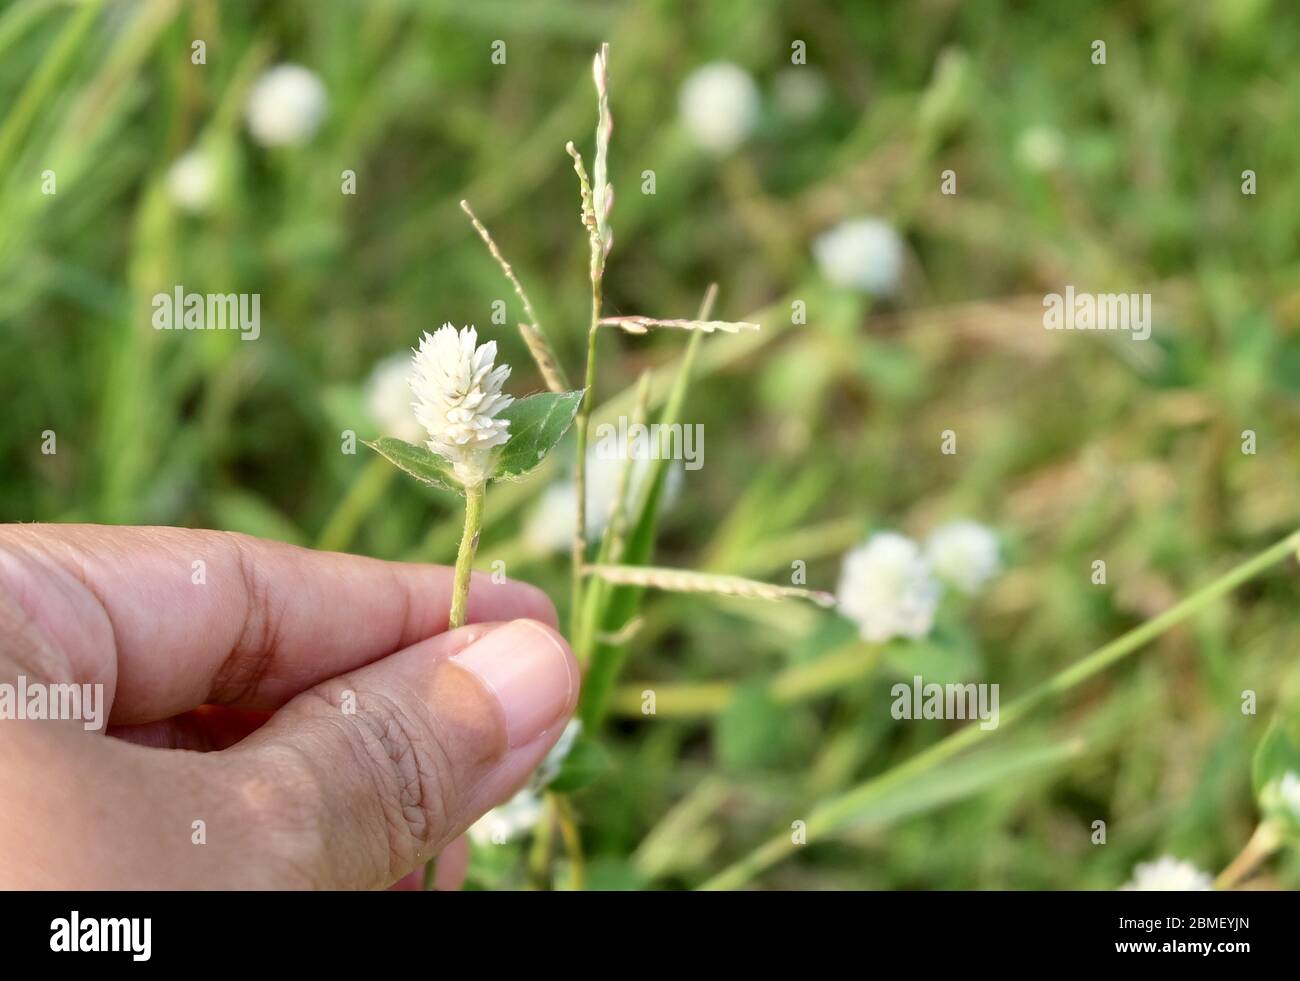 Flower and Plant, Hand Holding White Gomphrena Celosioides, Gomphrena Weed or Wild Globe Everlasting Flower, Used as Traditional Herbal Medicine. Stock Photo